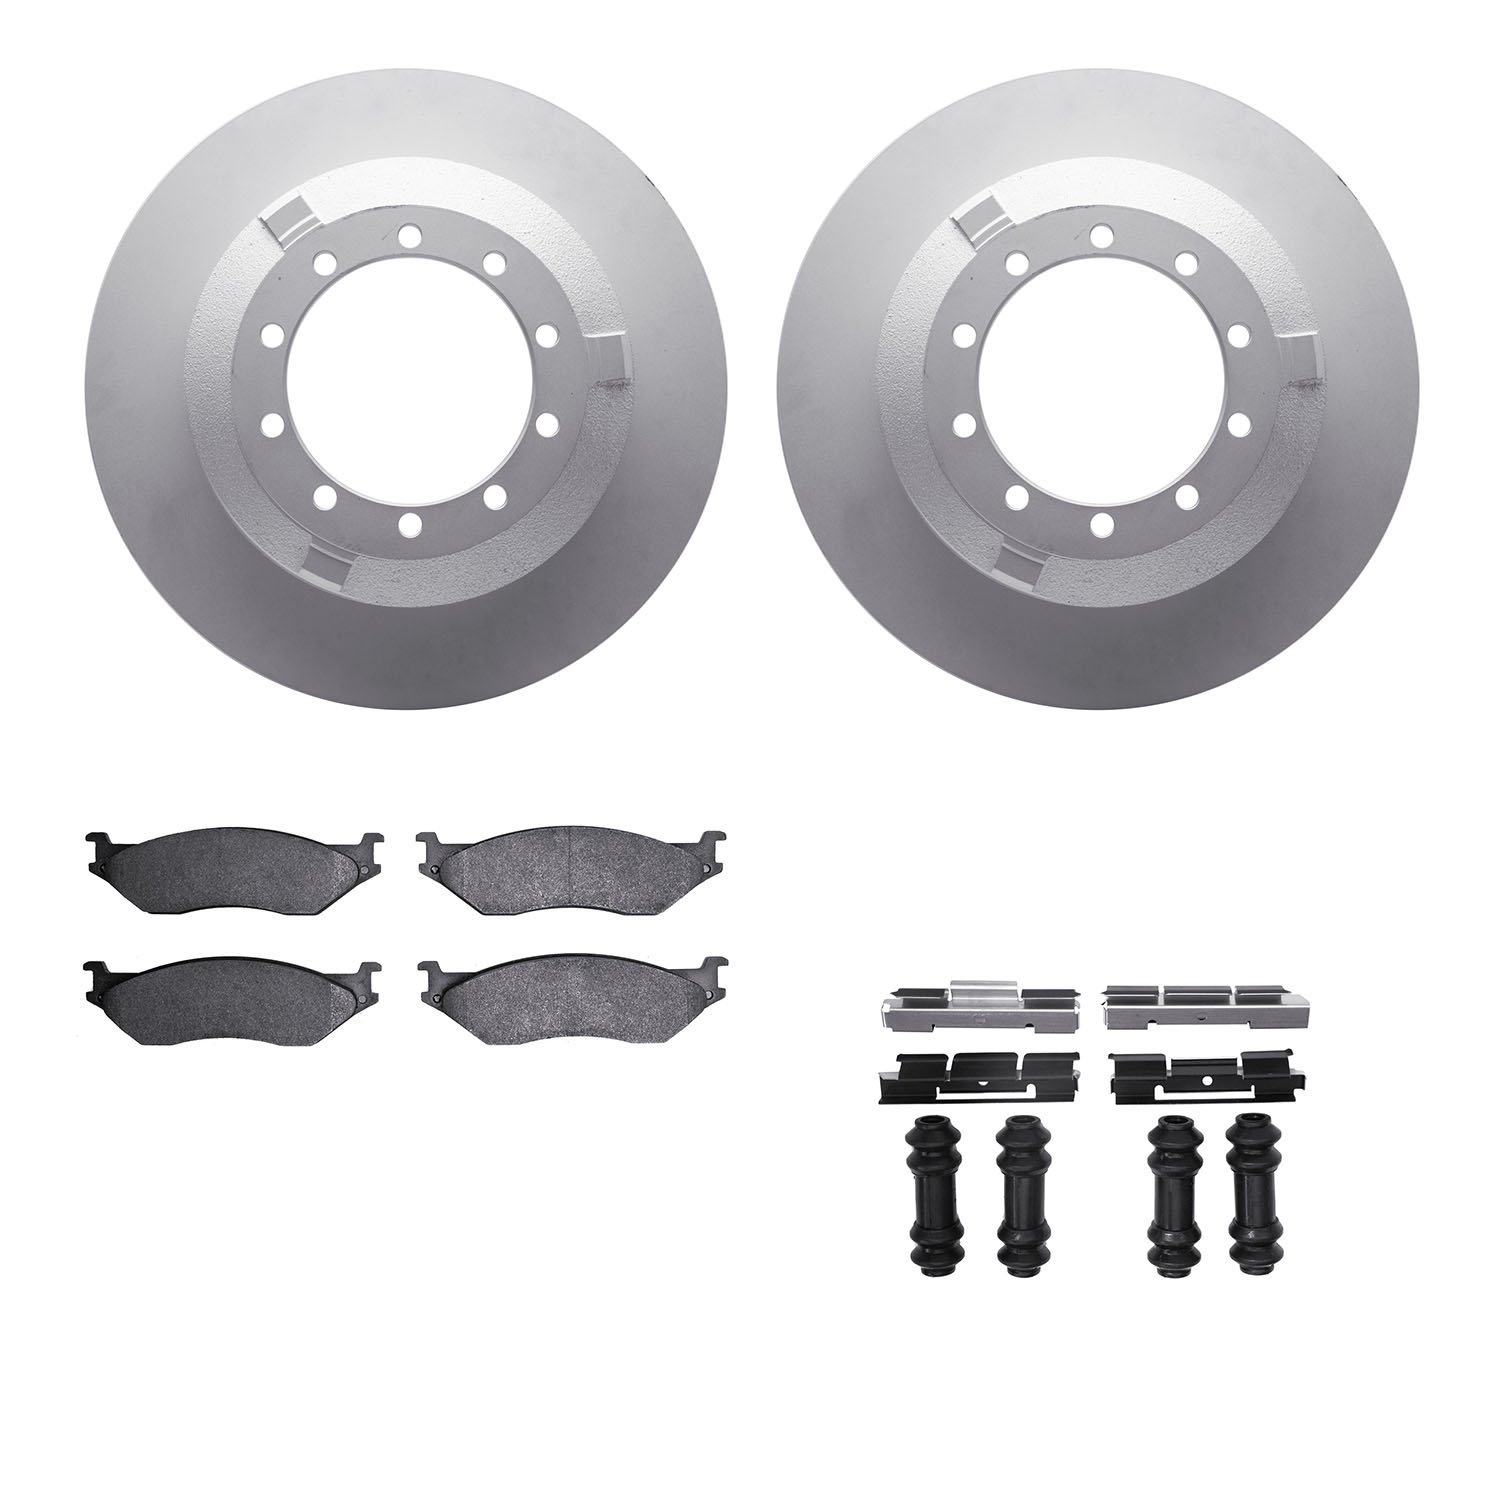 4412-54043 Geospec Brake Rotors with Ultimate-Duty Brake Pads & Hardware, 1999-2009 Ford/Lincoln/Mercury/Mazda, Position: Rear